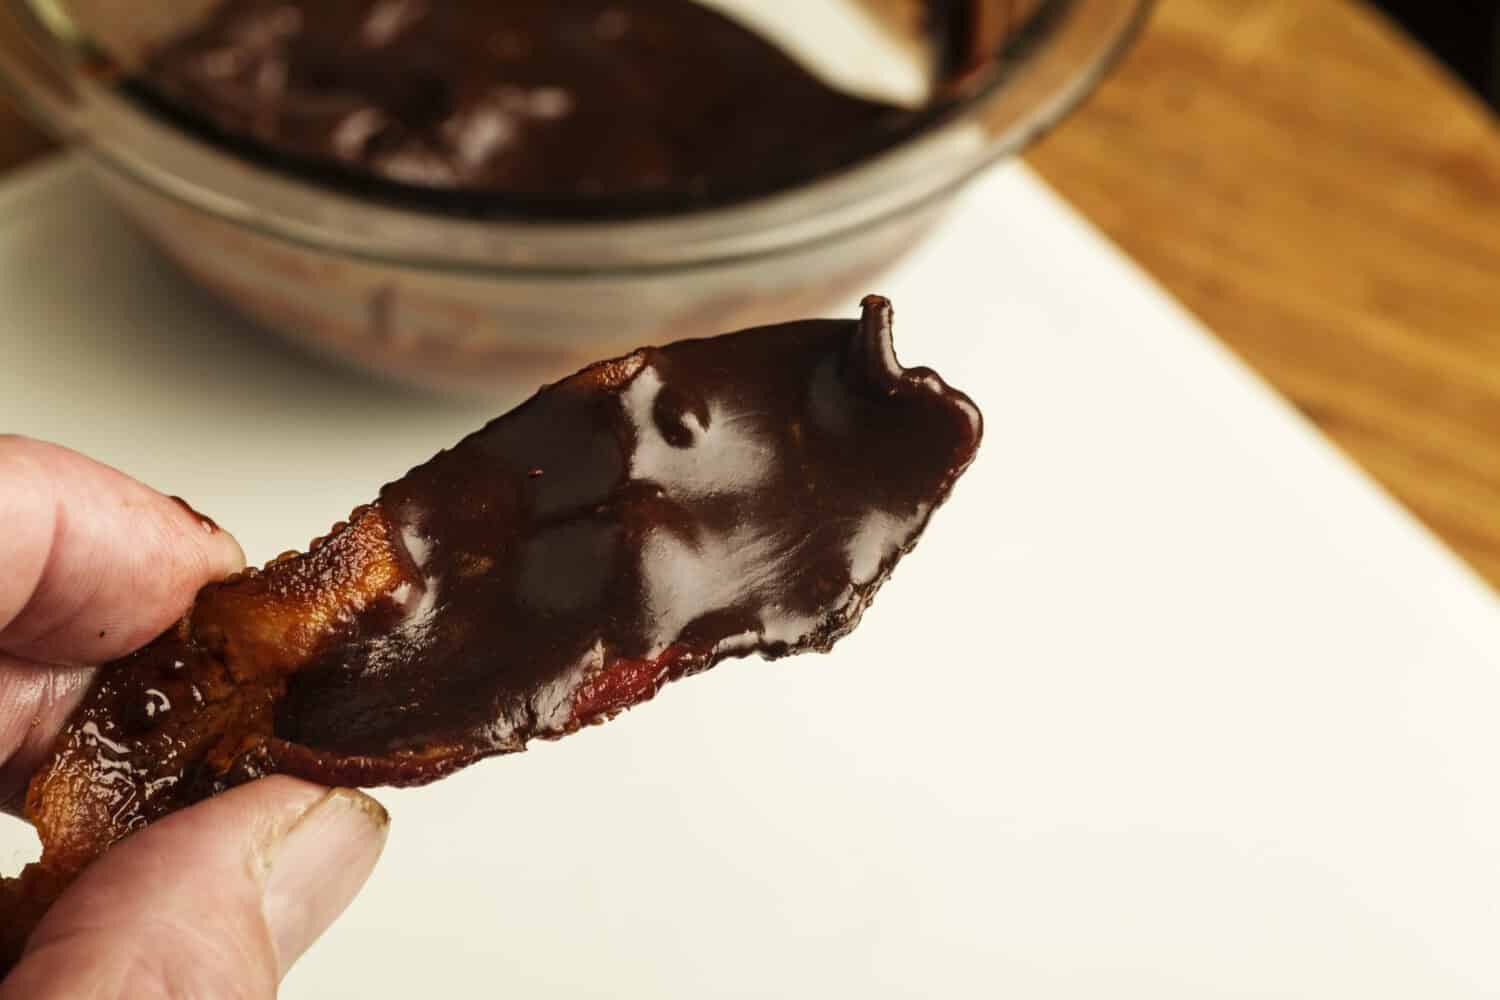 Cooked bacon slice covered in dark chocolate ganache with glass chocolate-filled bowl in the background